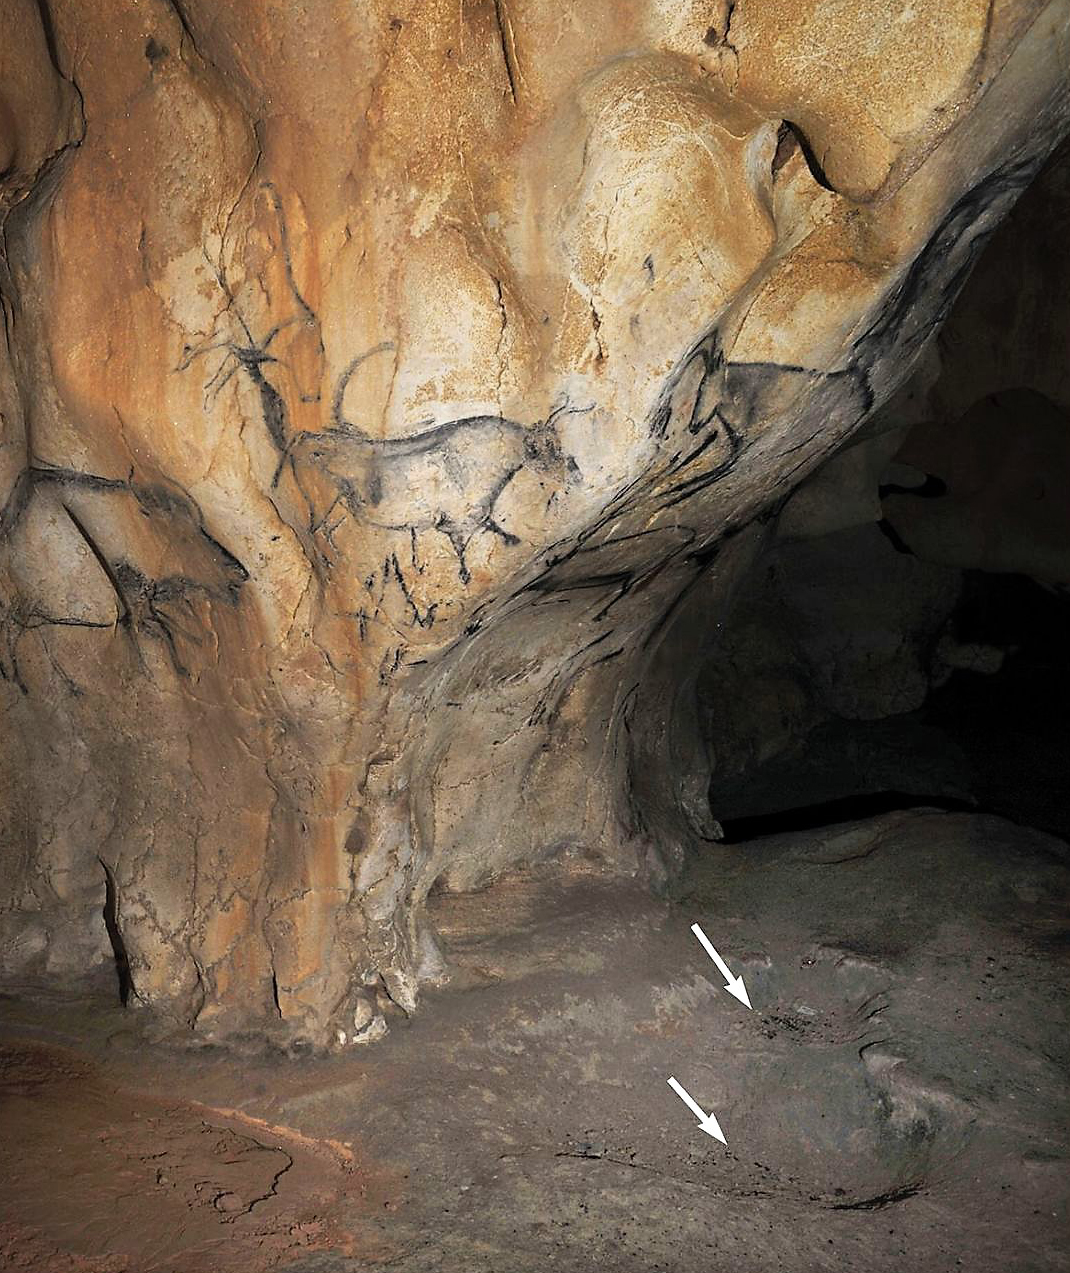 Ice Age Artists at Chauvet Cave Made Charcoal From Pine to Draw